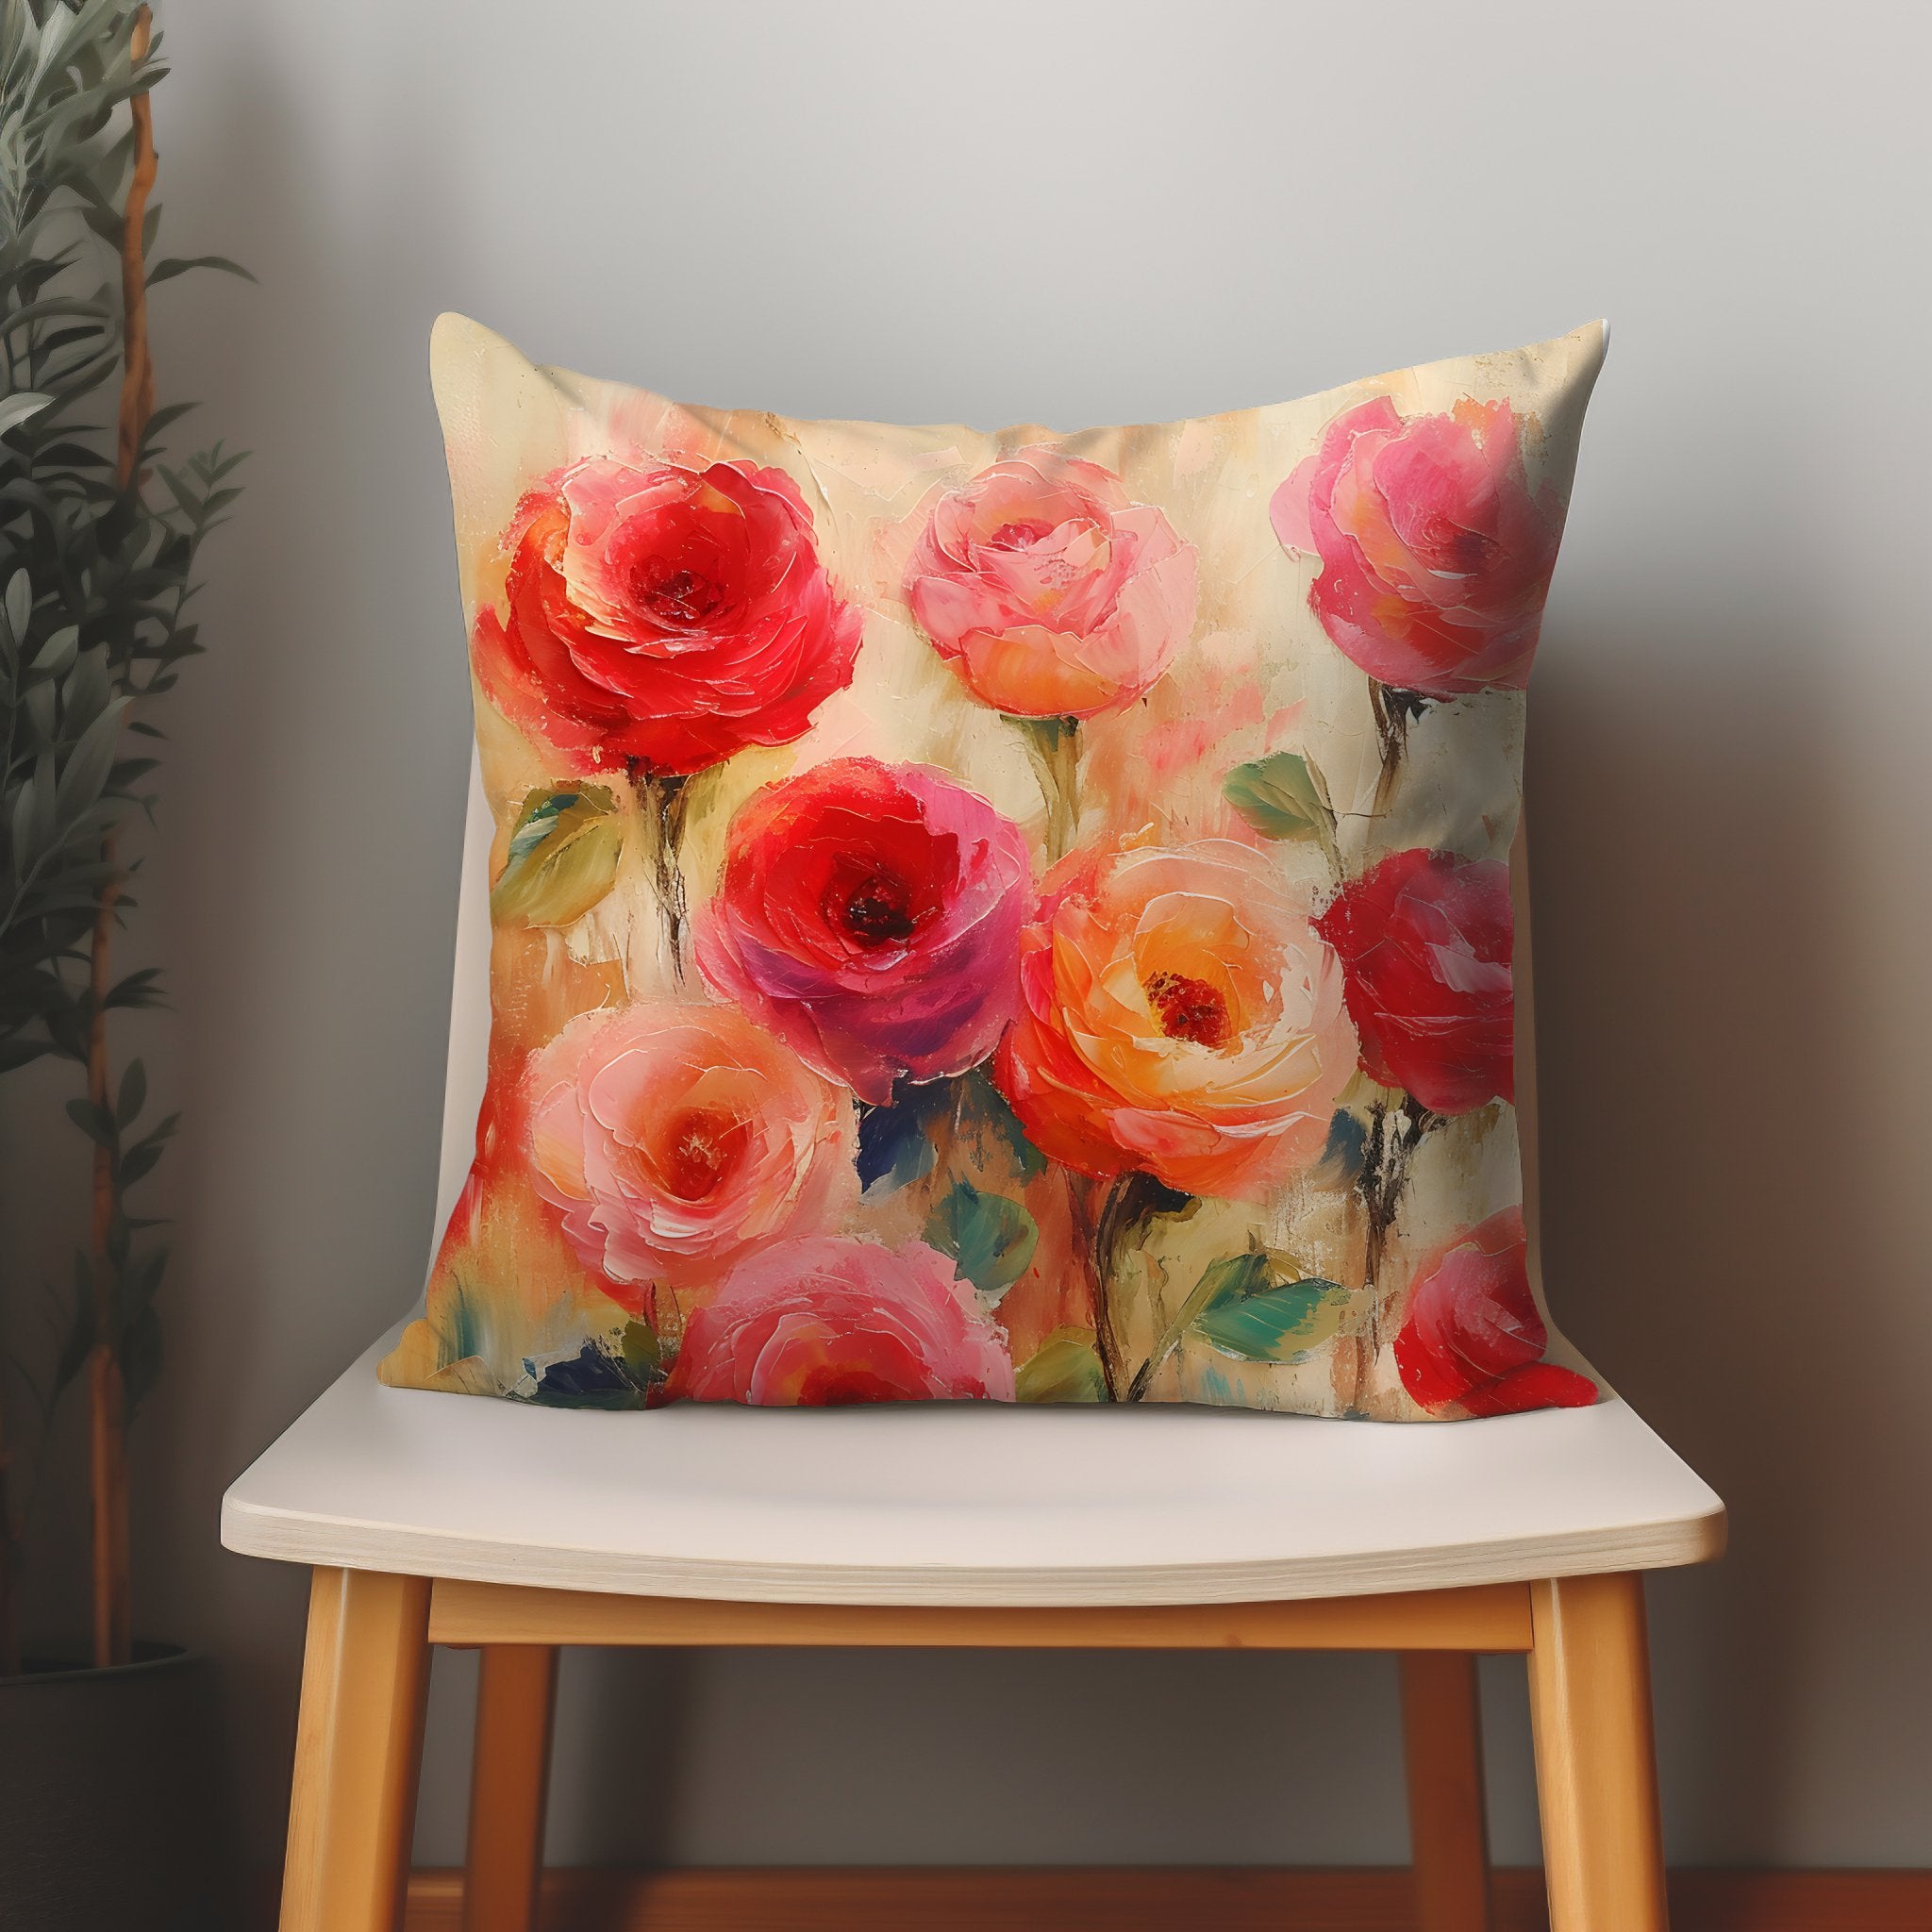 Rosy Radiance: Blossoming Roses Pillow & Covers - My Store